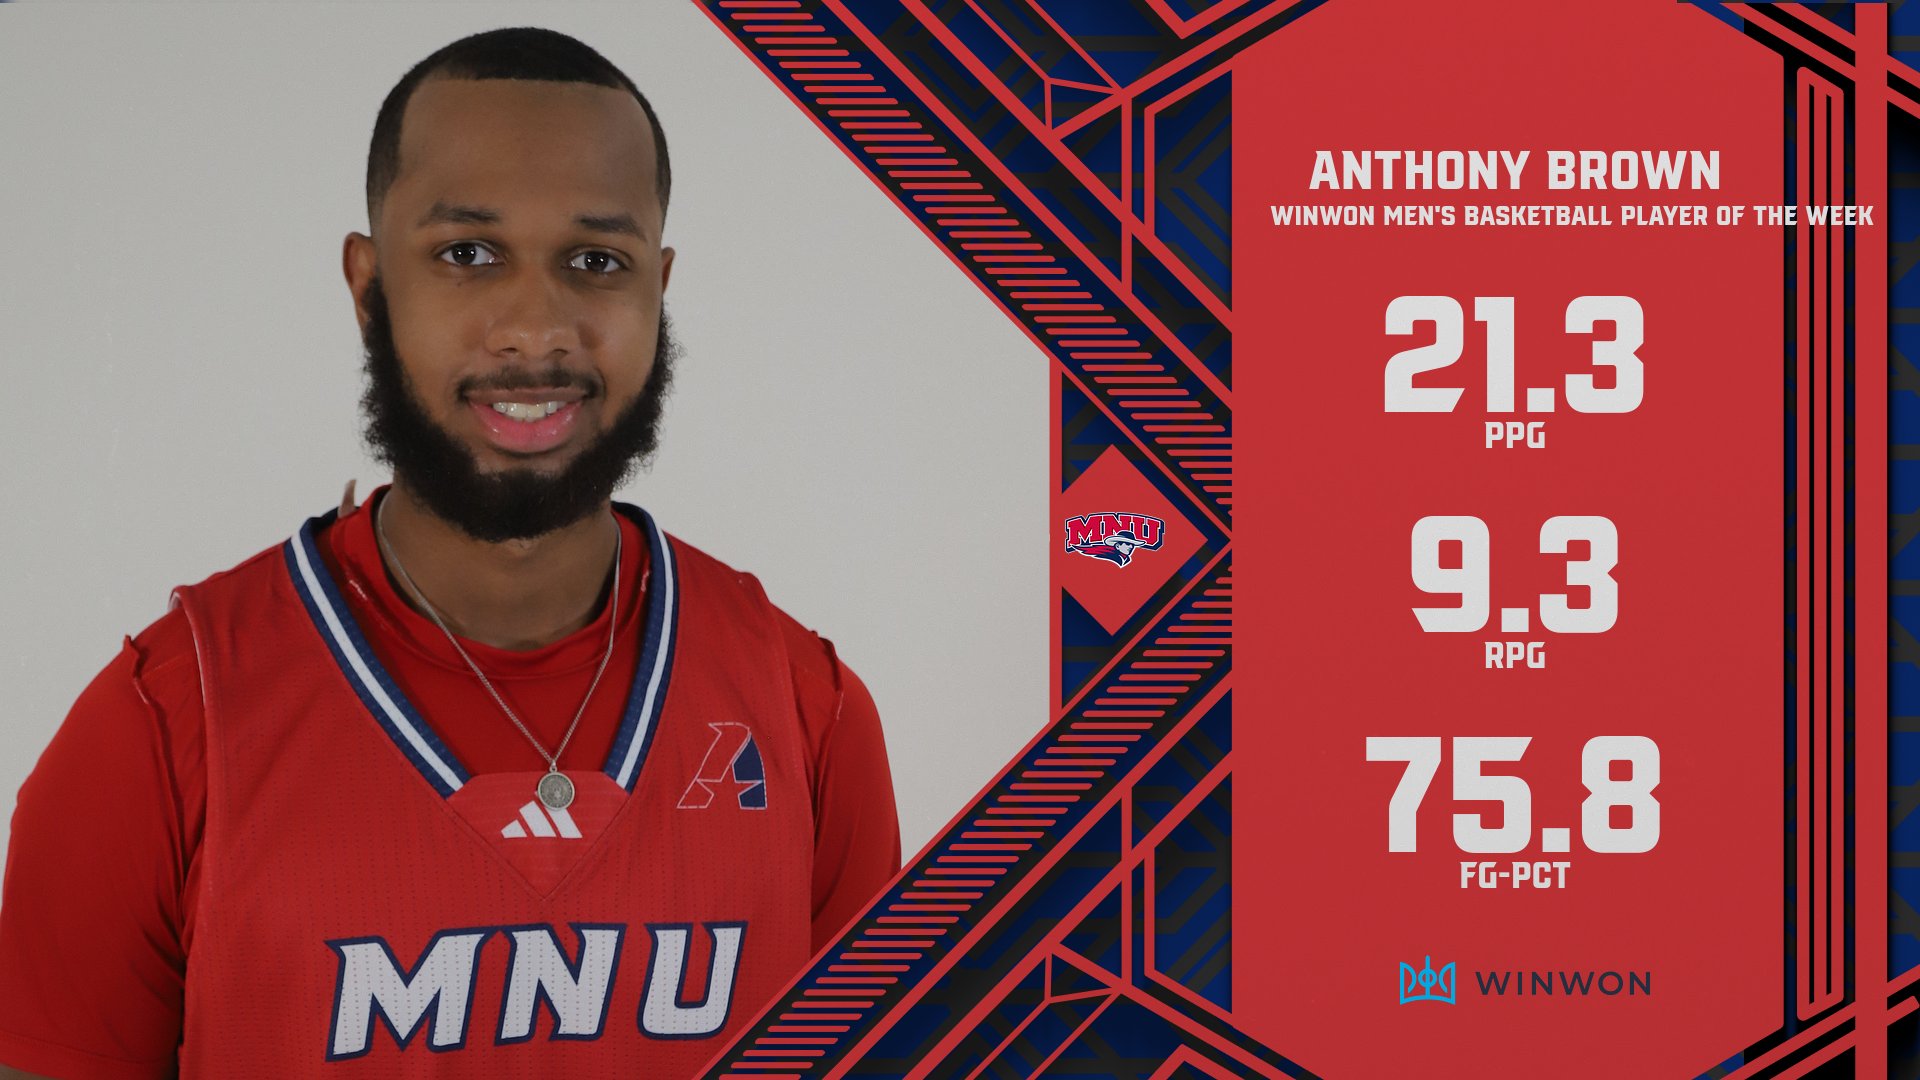 Anthony Brown of (RV) MidAmerica Nazarene Selected WinWon Men’s Basketball Player of the Week